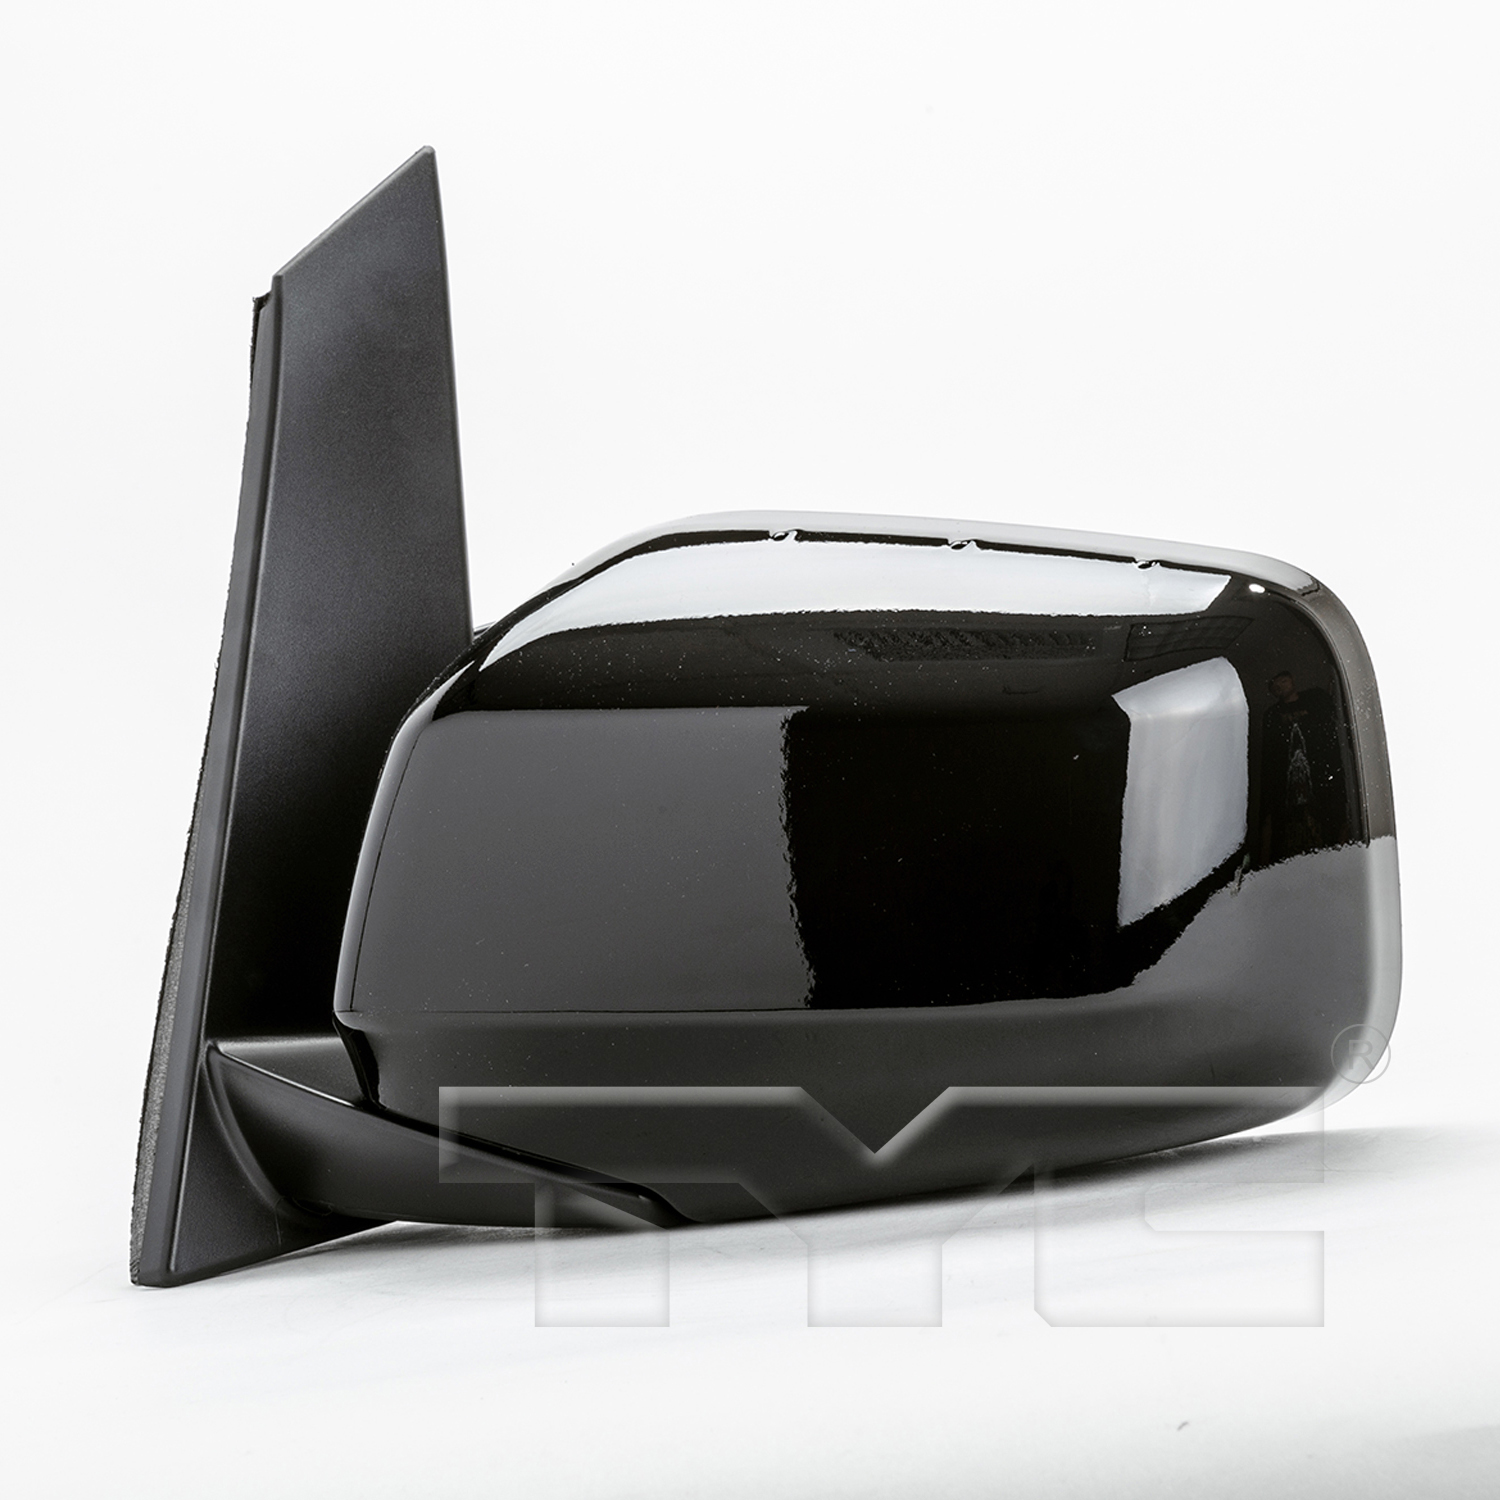 Aftermarket MIRRORS for HONDA - ODYSSEY, ODYSSEY,11-13,LT Mirror outside rear view